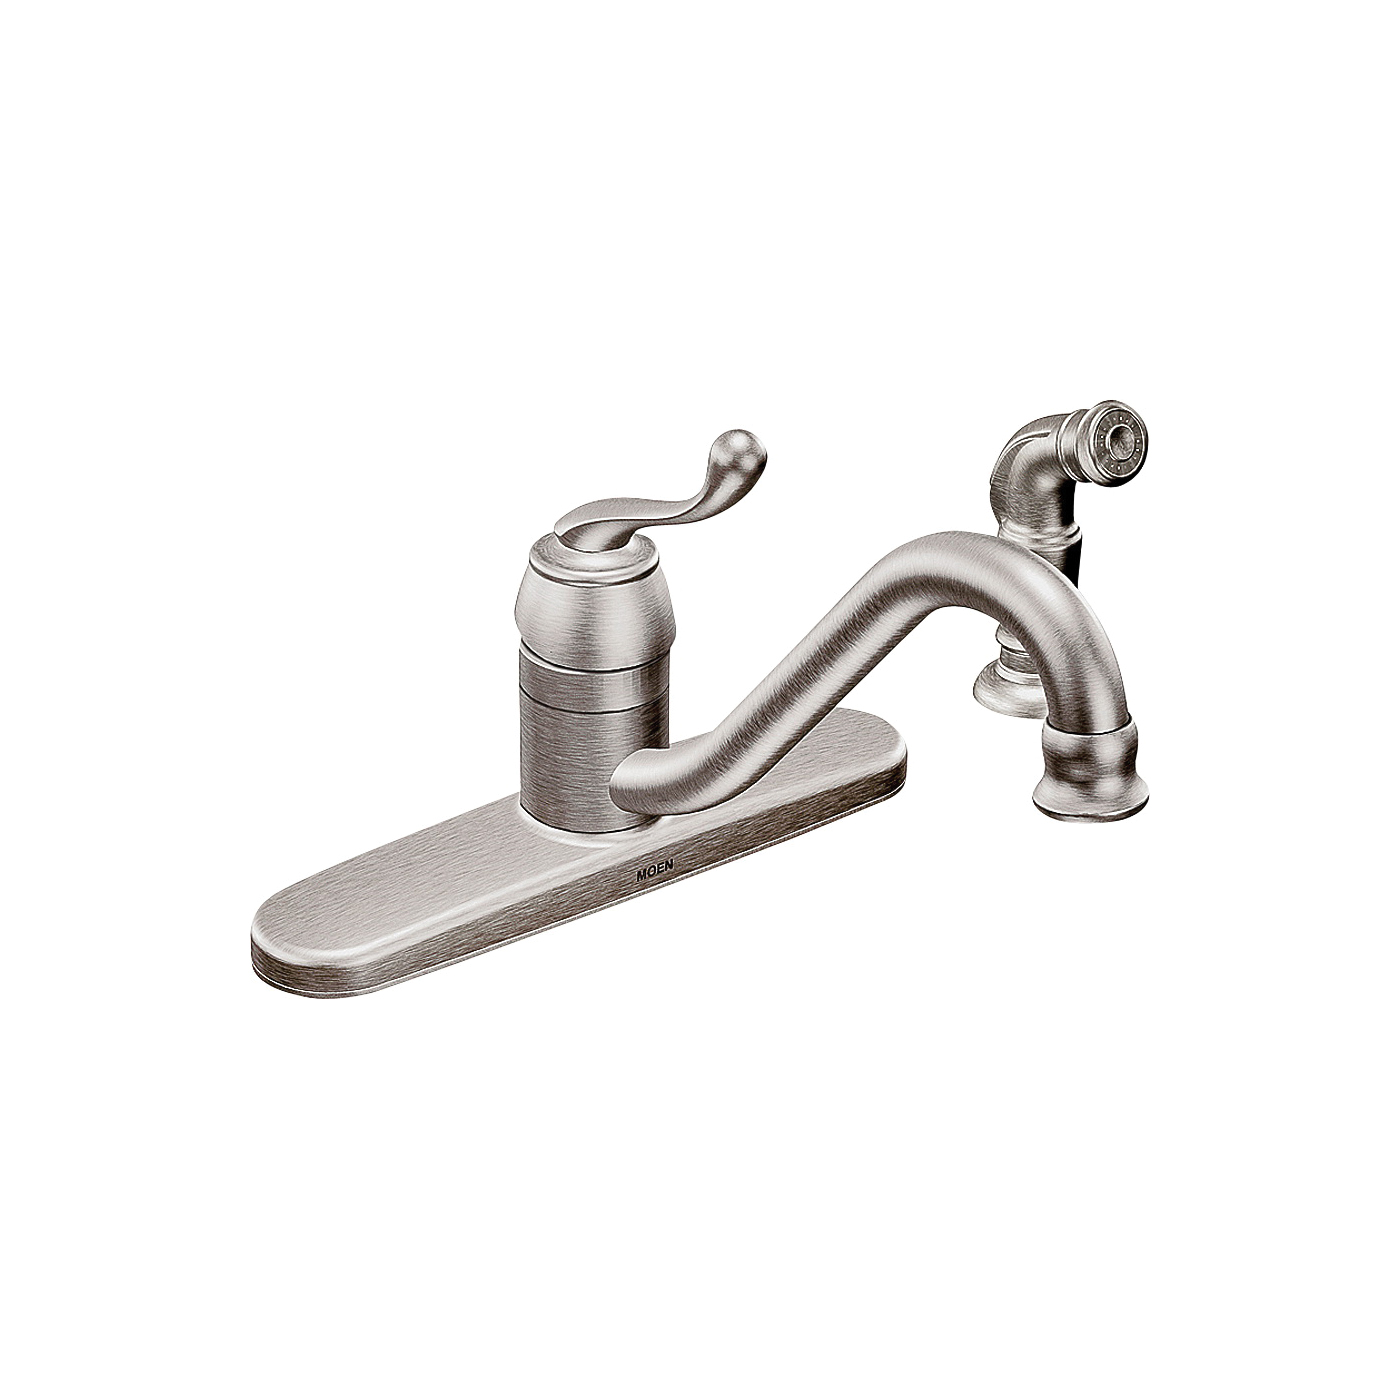 Muirfield Series CA87520SRS Kitchen Faucet, 1.5 gpm, 1-Faucet Handle, Stainless Steel, Stainless Steel